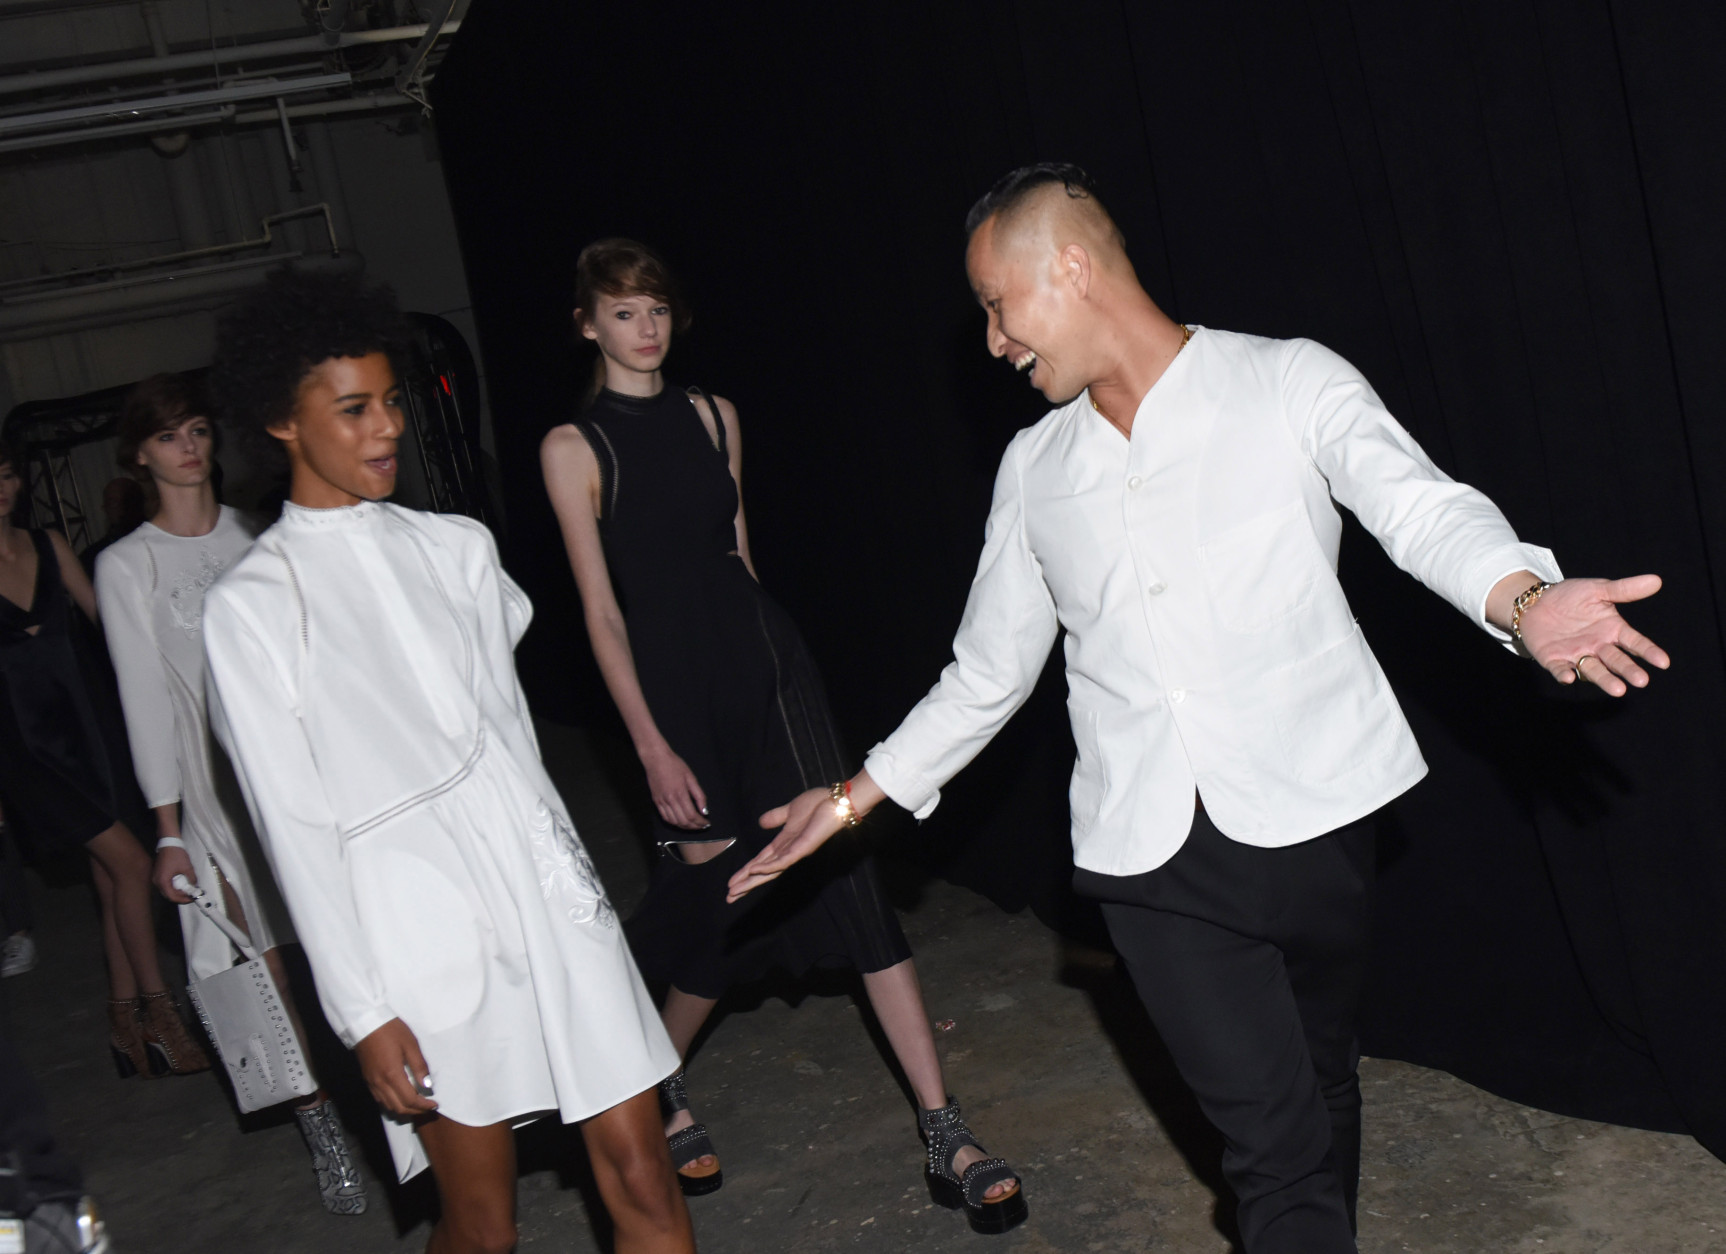 NEW YORK, NY - SEPTEMBER 12:  Fashion designer Phillip Lim and models backstage at 3.1 Phillip Lim during New York Fashion Week 2016 at Skylight Clarkson North on September 12, 2016 in New York City.  (Photo by Vivien Killilea/Getty Images)